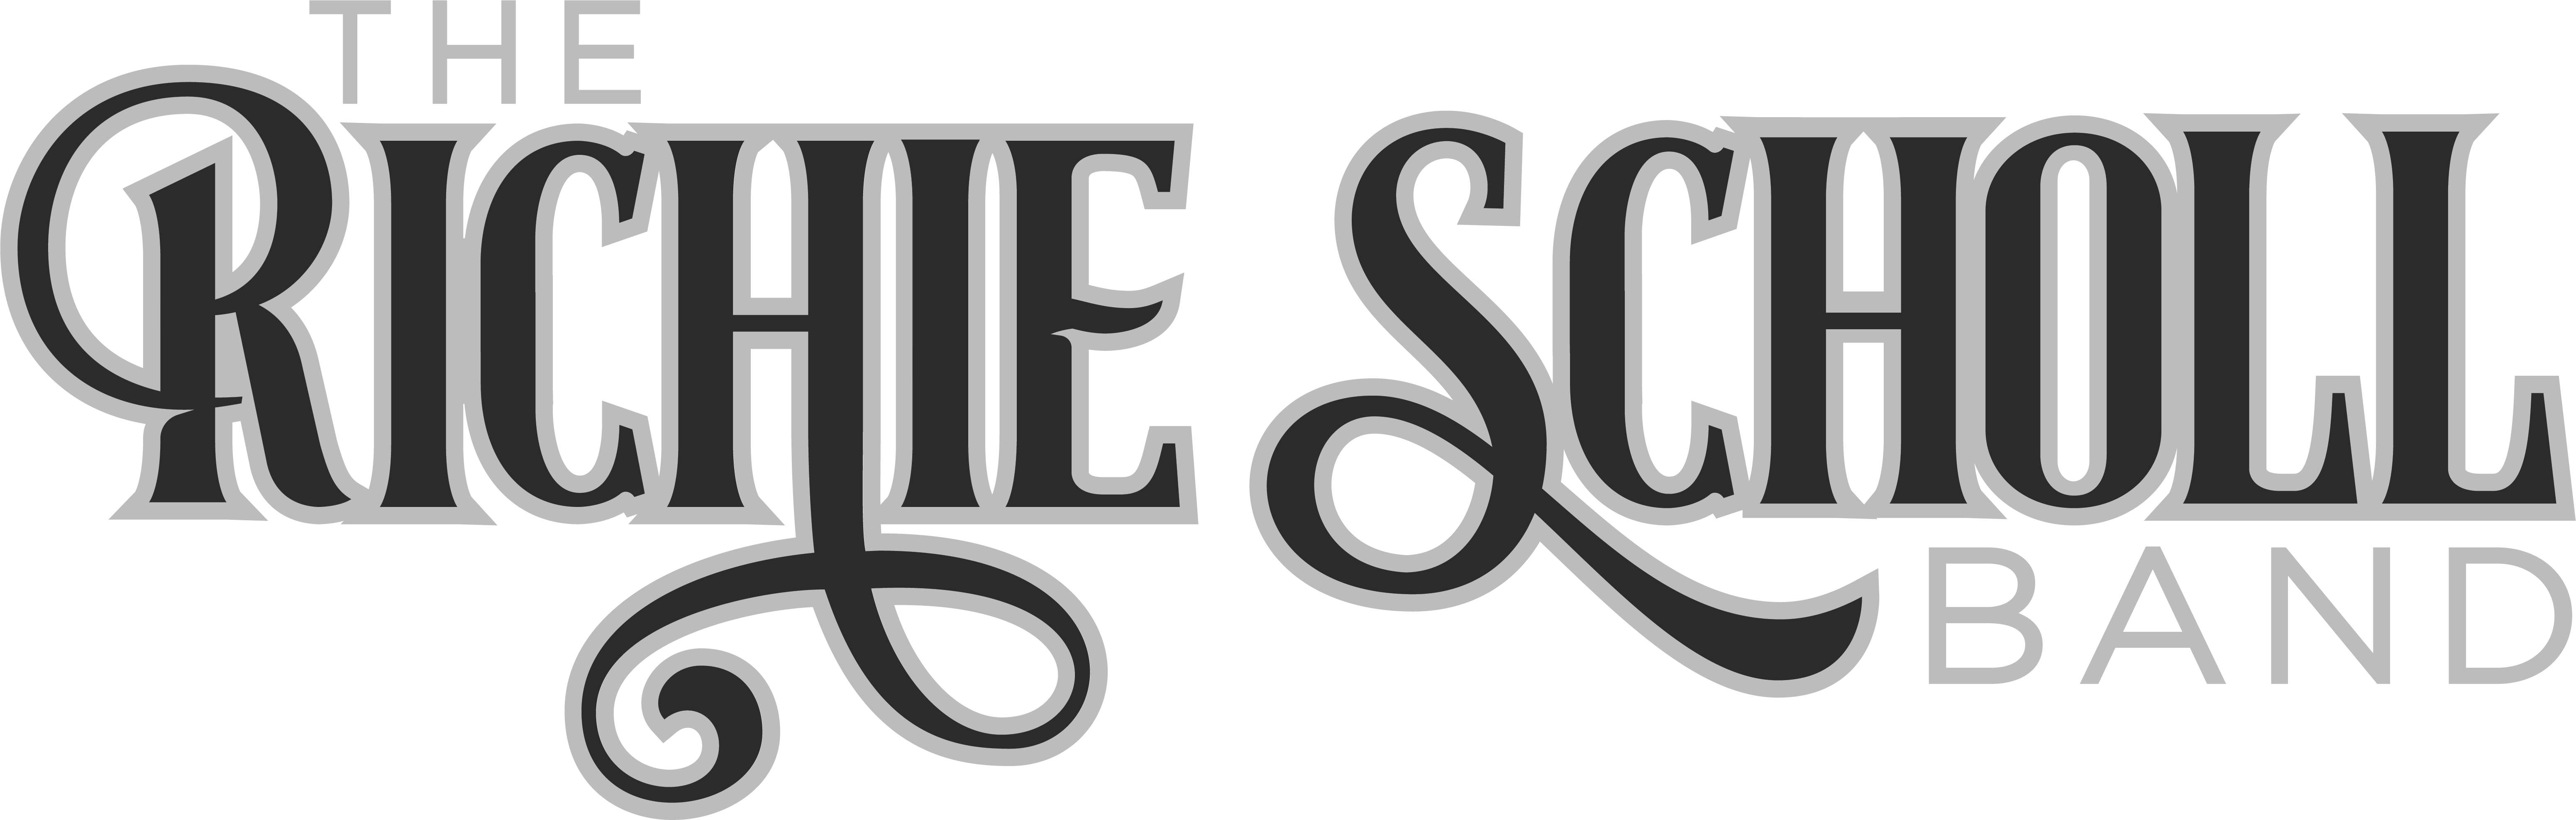 The Richie Scholl Band